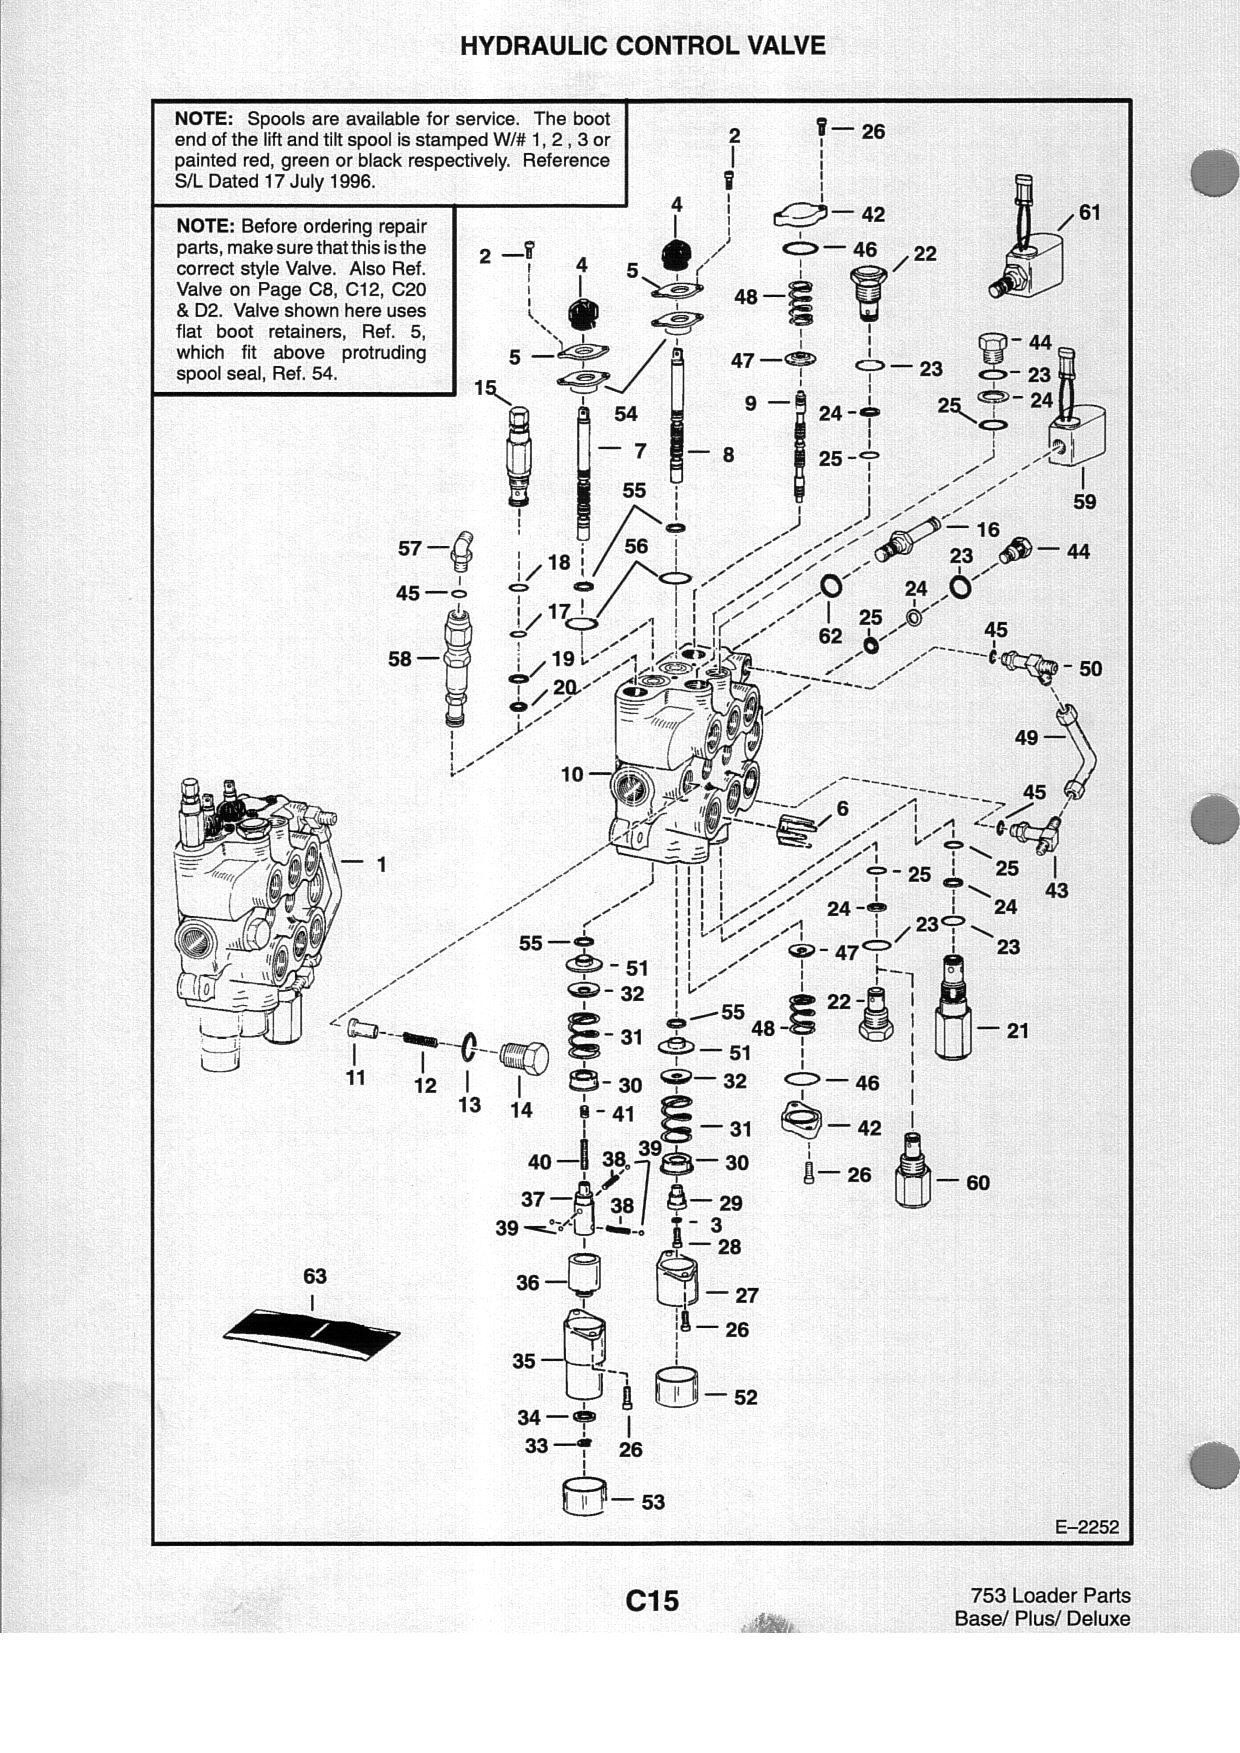 New Holland Skid Steer Parts Diagram Skid Steer Hydraulic Schematic Wiring Diagram Project